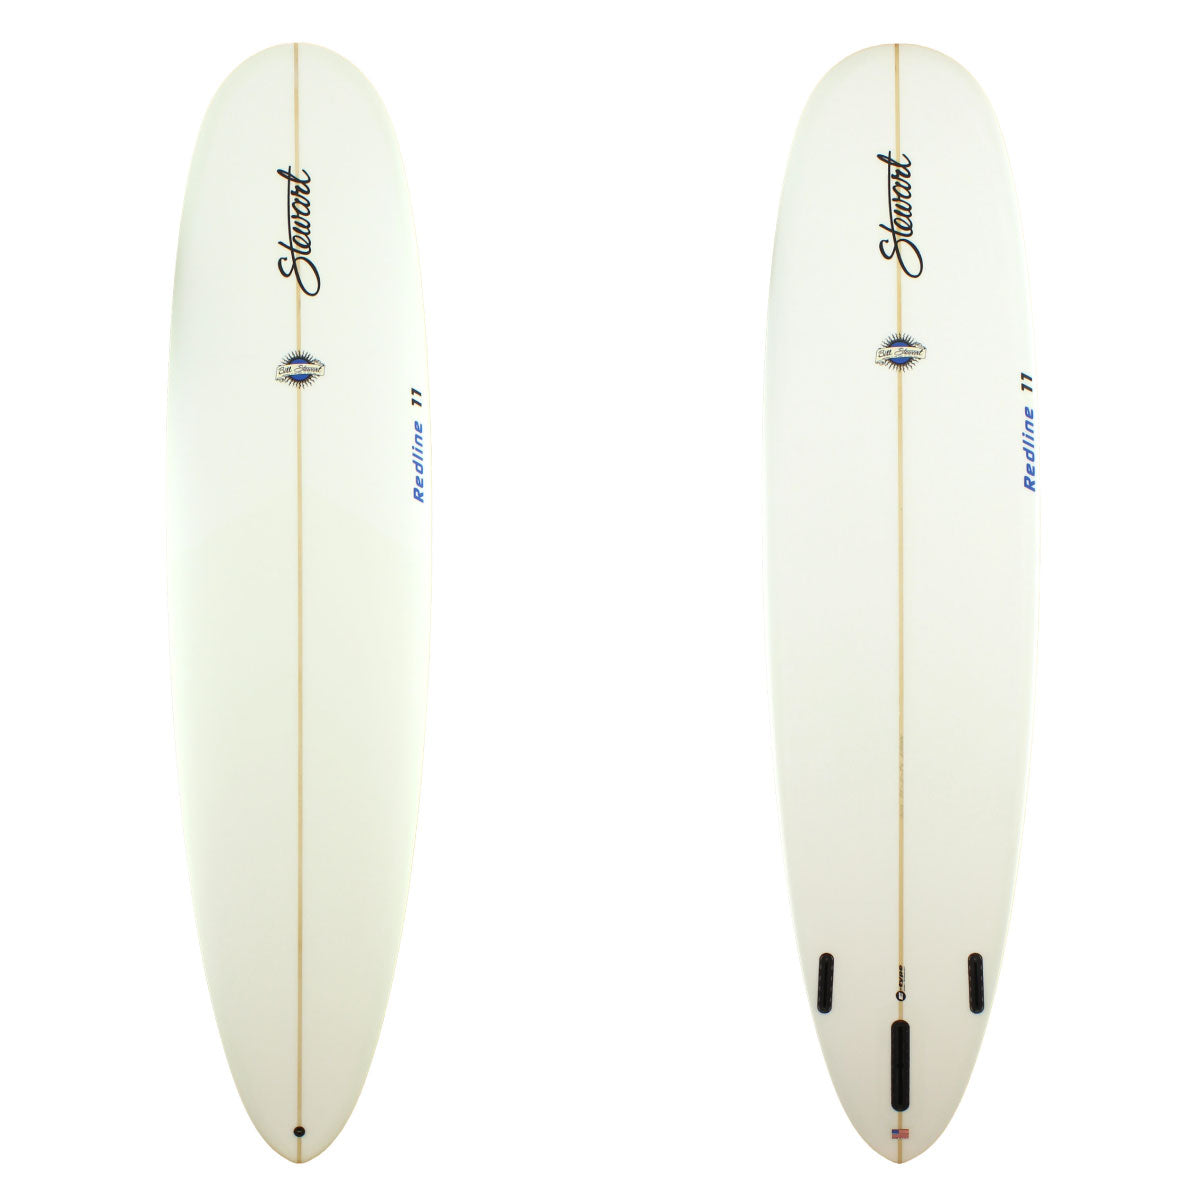 Stewart Surfboards Redline 11 longboard (9'0", 24", 3 1/8") with clear white deck and bottom